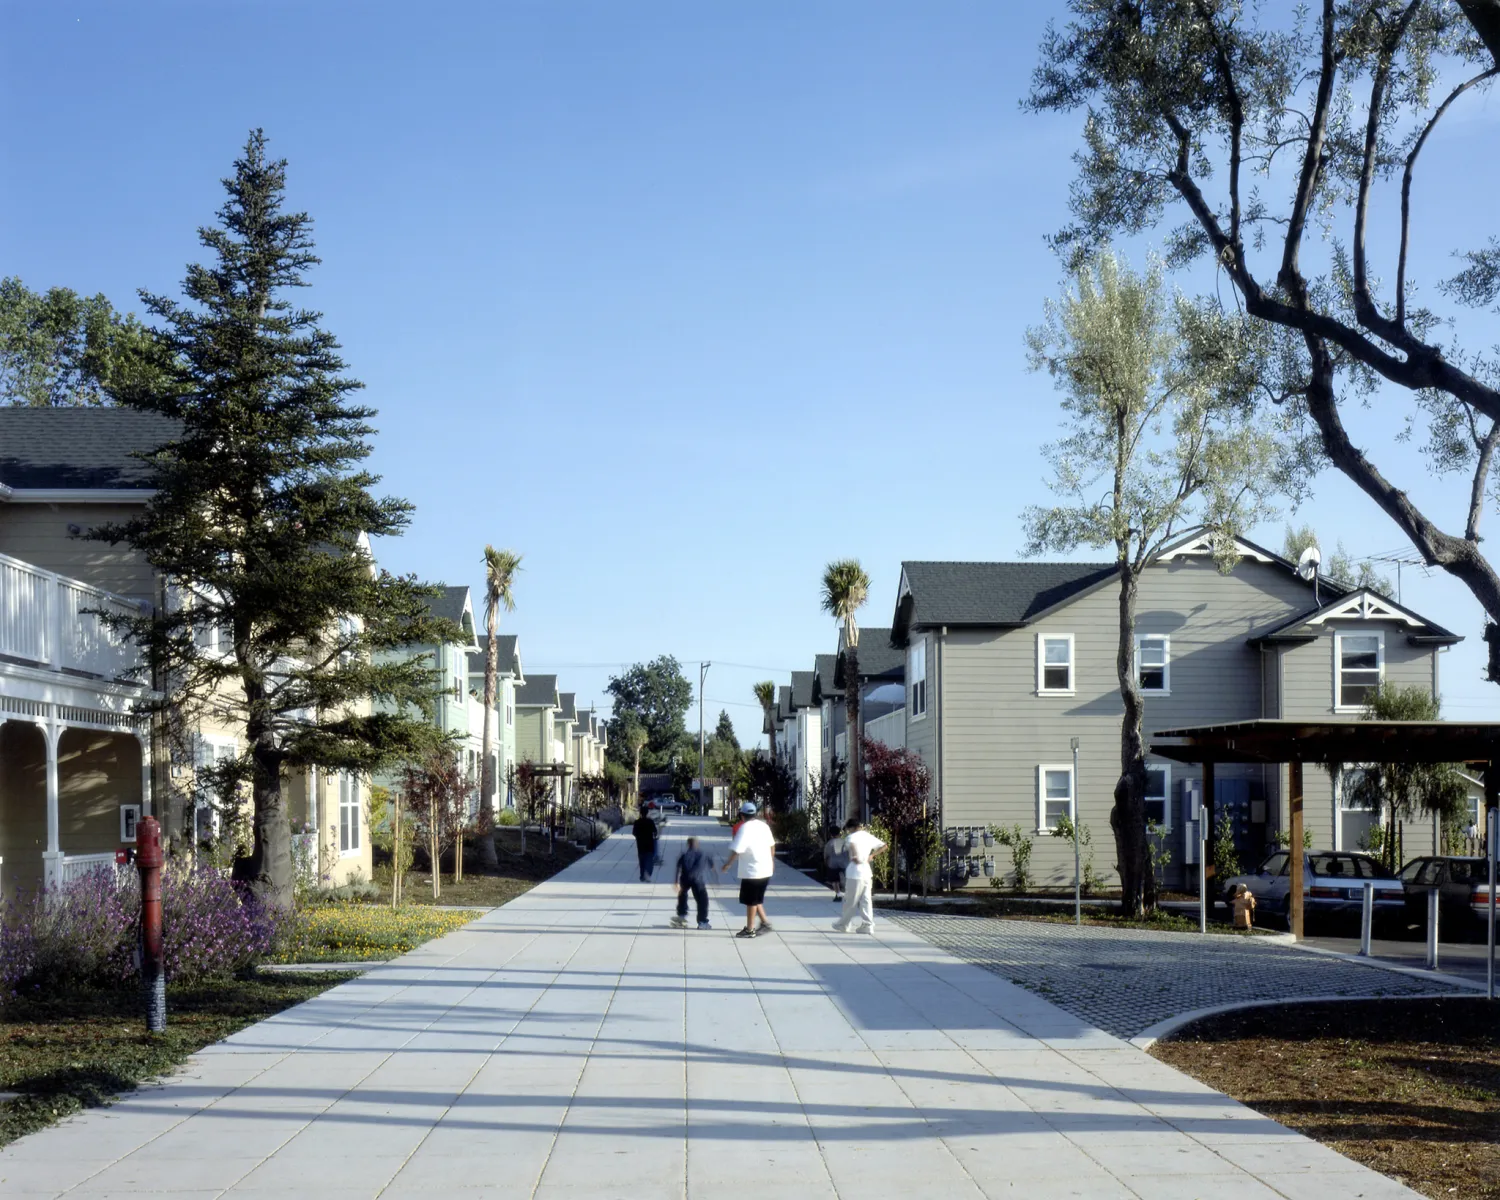 People walking down the pedestrian path at Oroysom Village in Fremont, California.